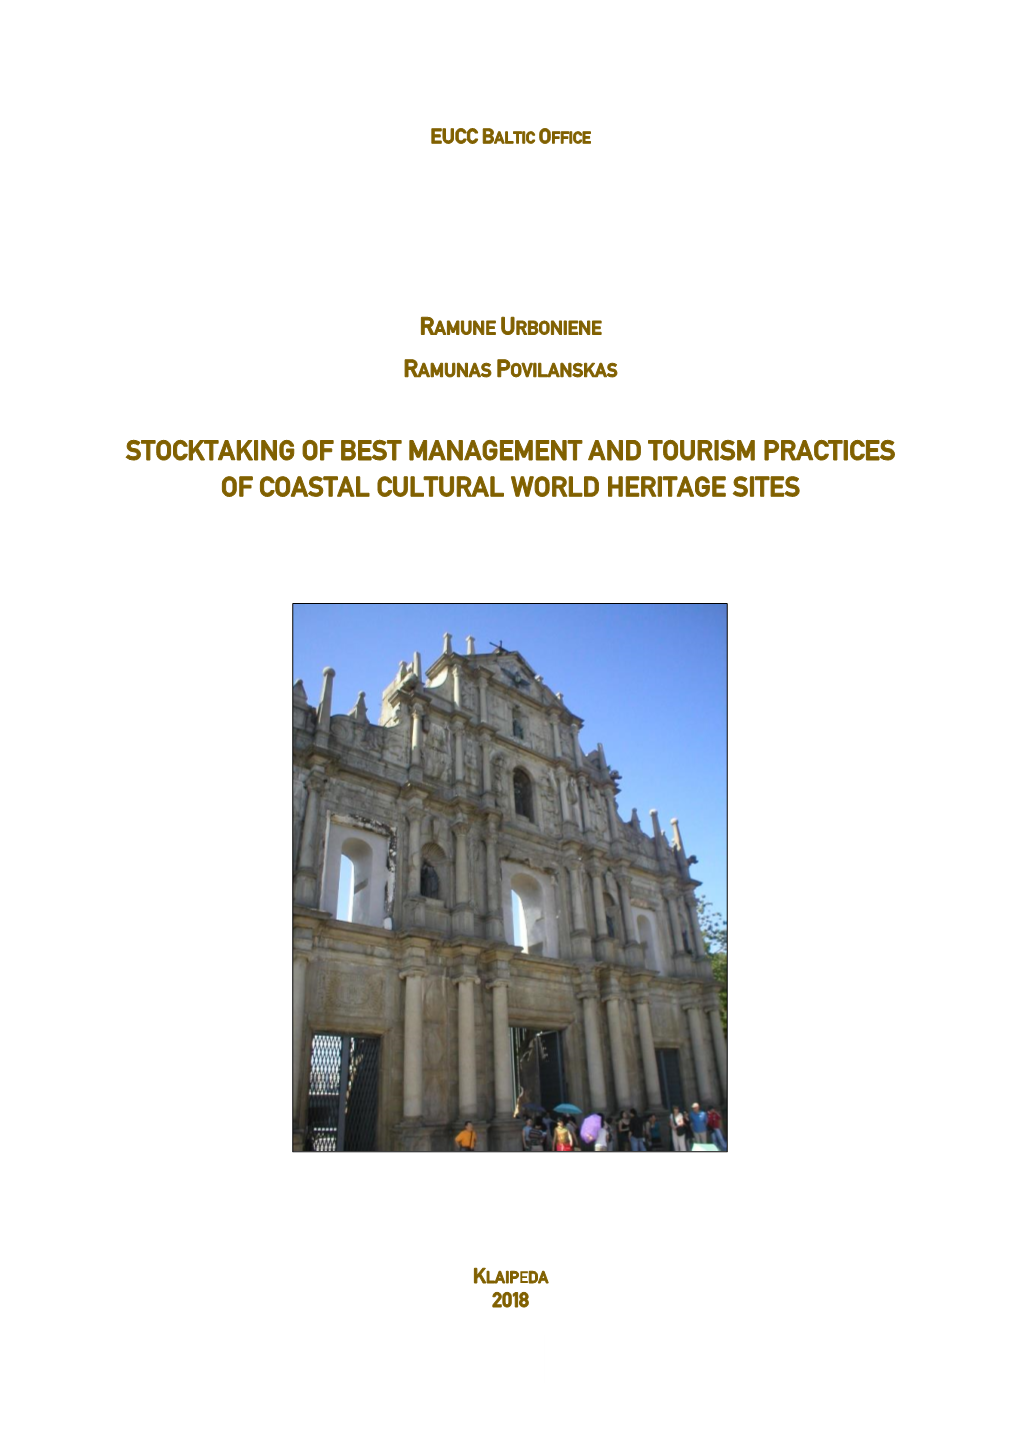 Stocktaking of Best Management and Tourism Practices of Coastal Cultural World Heritage Sites